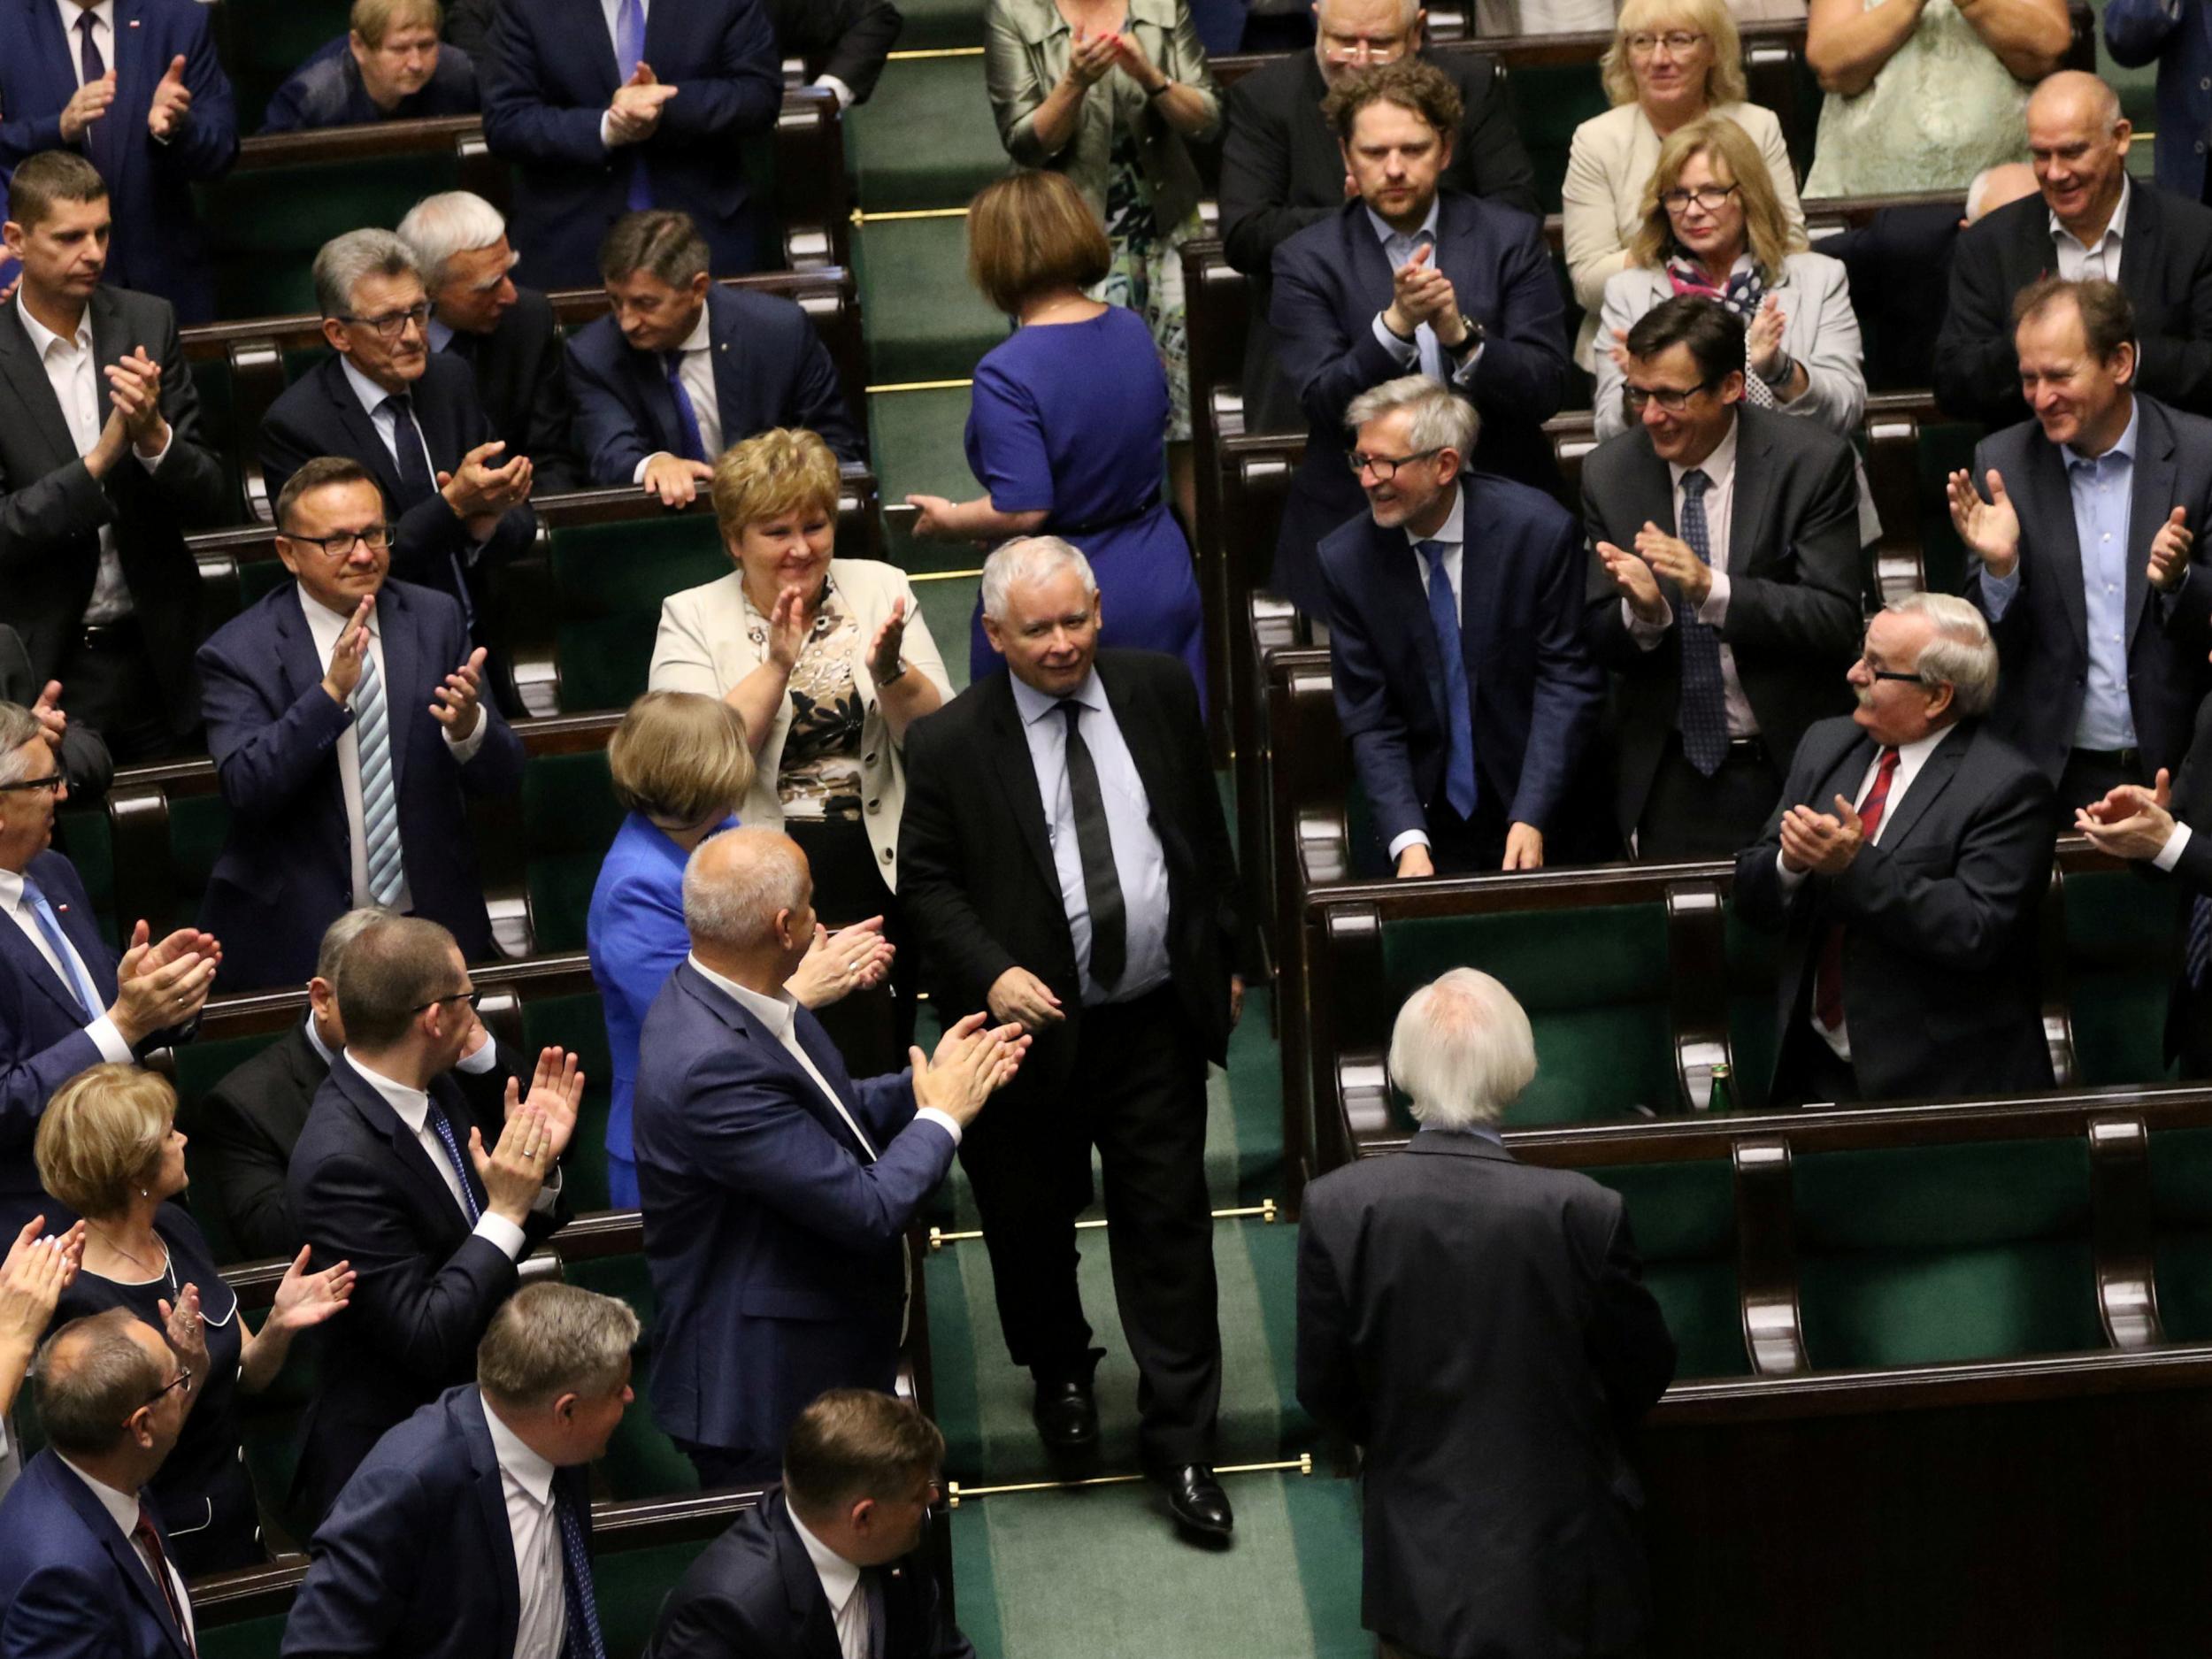 Law and Justice (PiS) party leader Jaroslaw Kaczynski enters parliament as his party members applaud